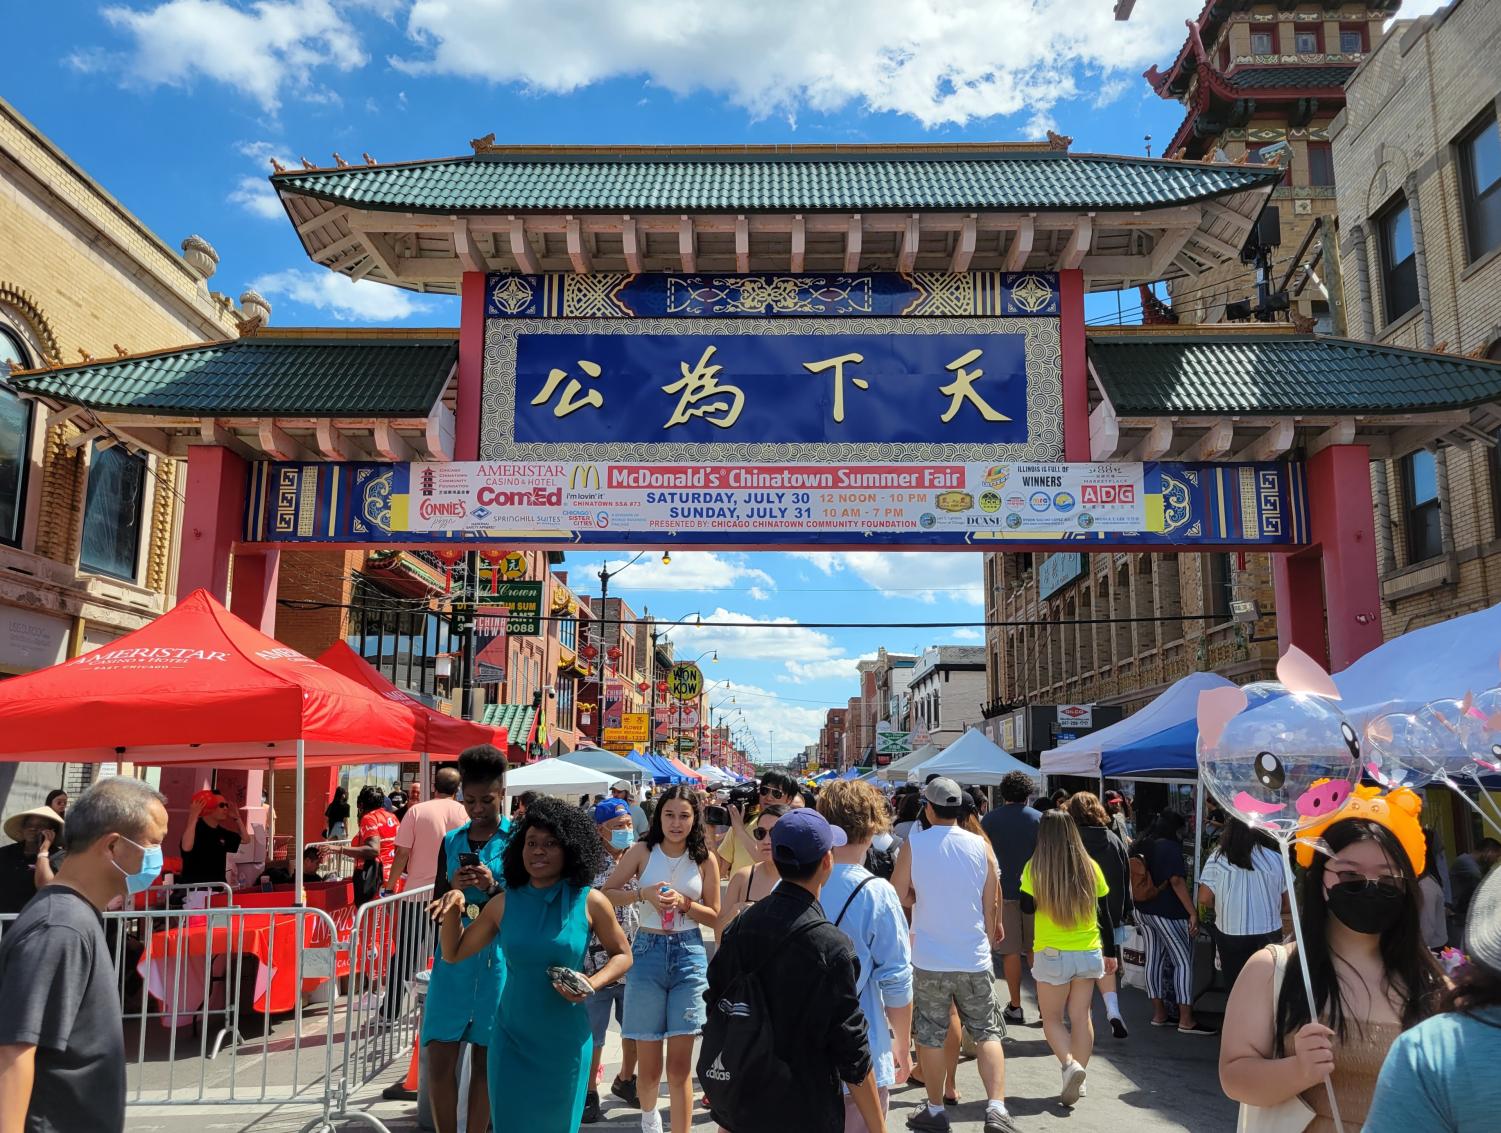 Chicago Chinatown Summer Fair entertains local residents, NU students